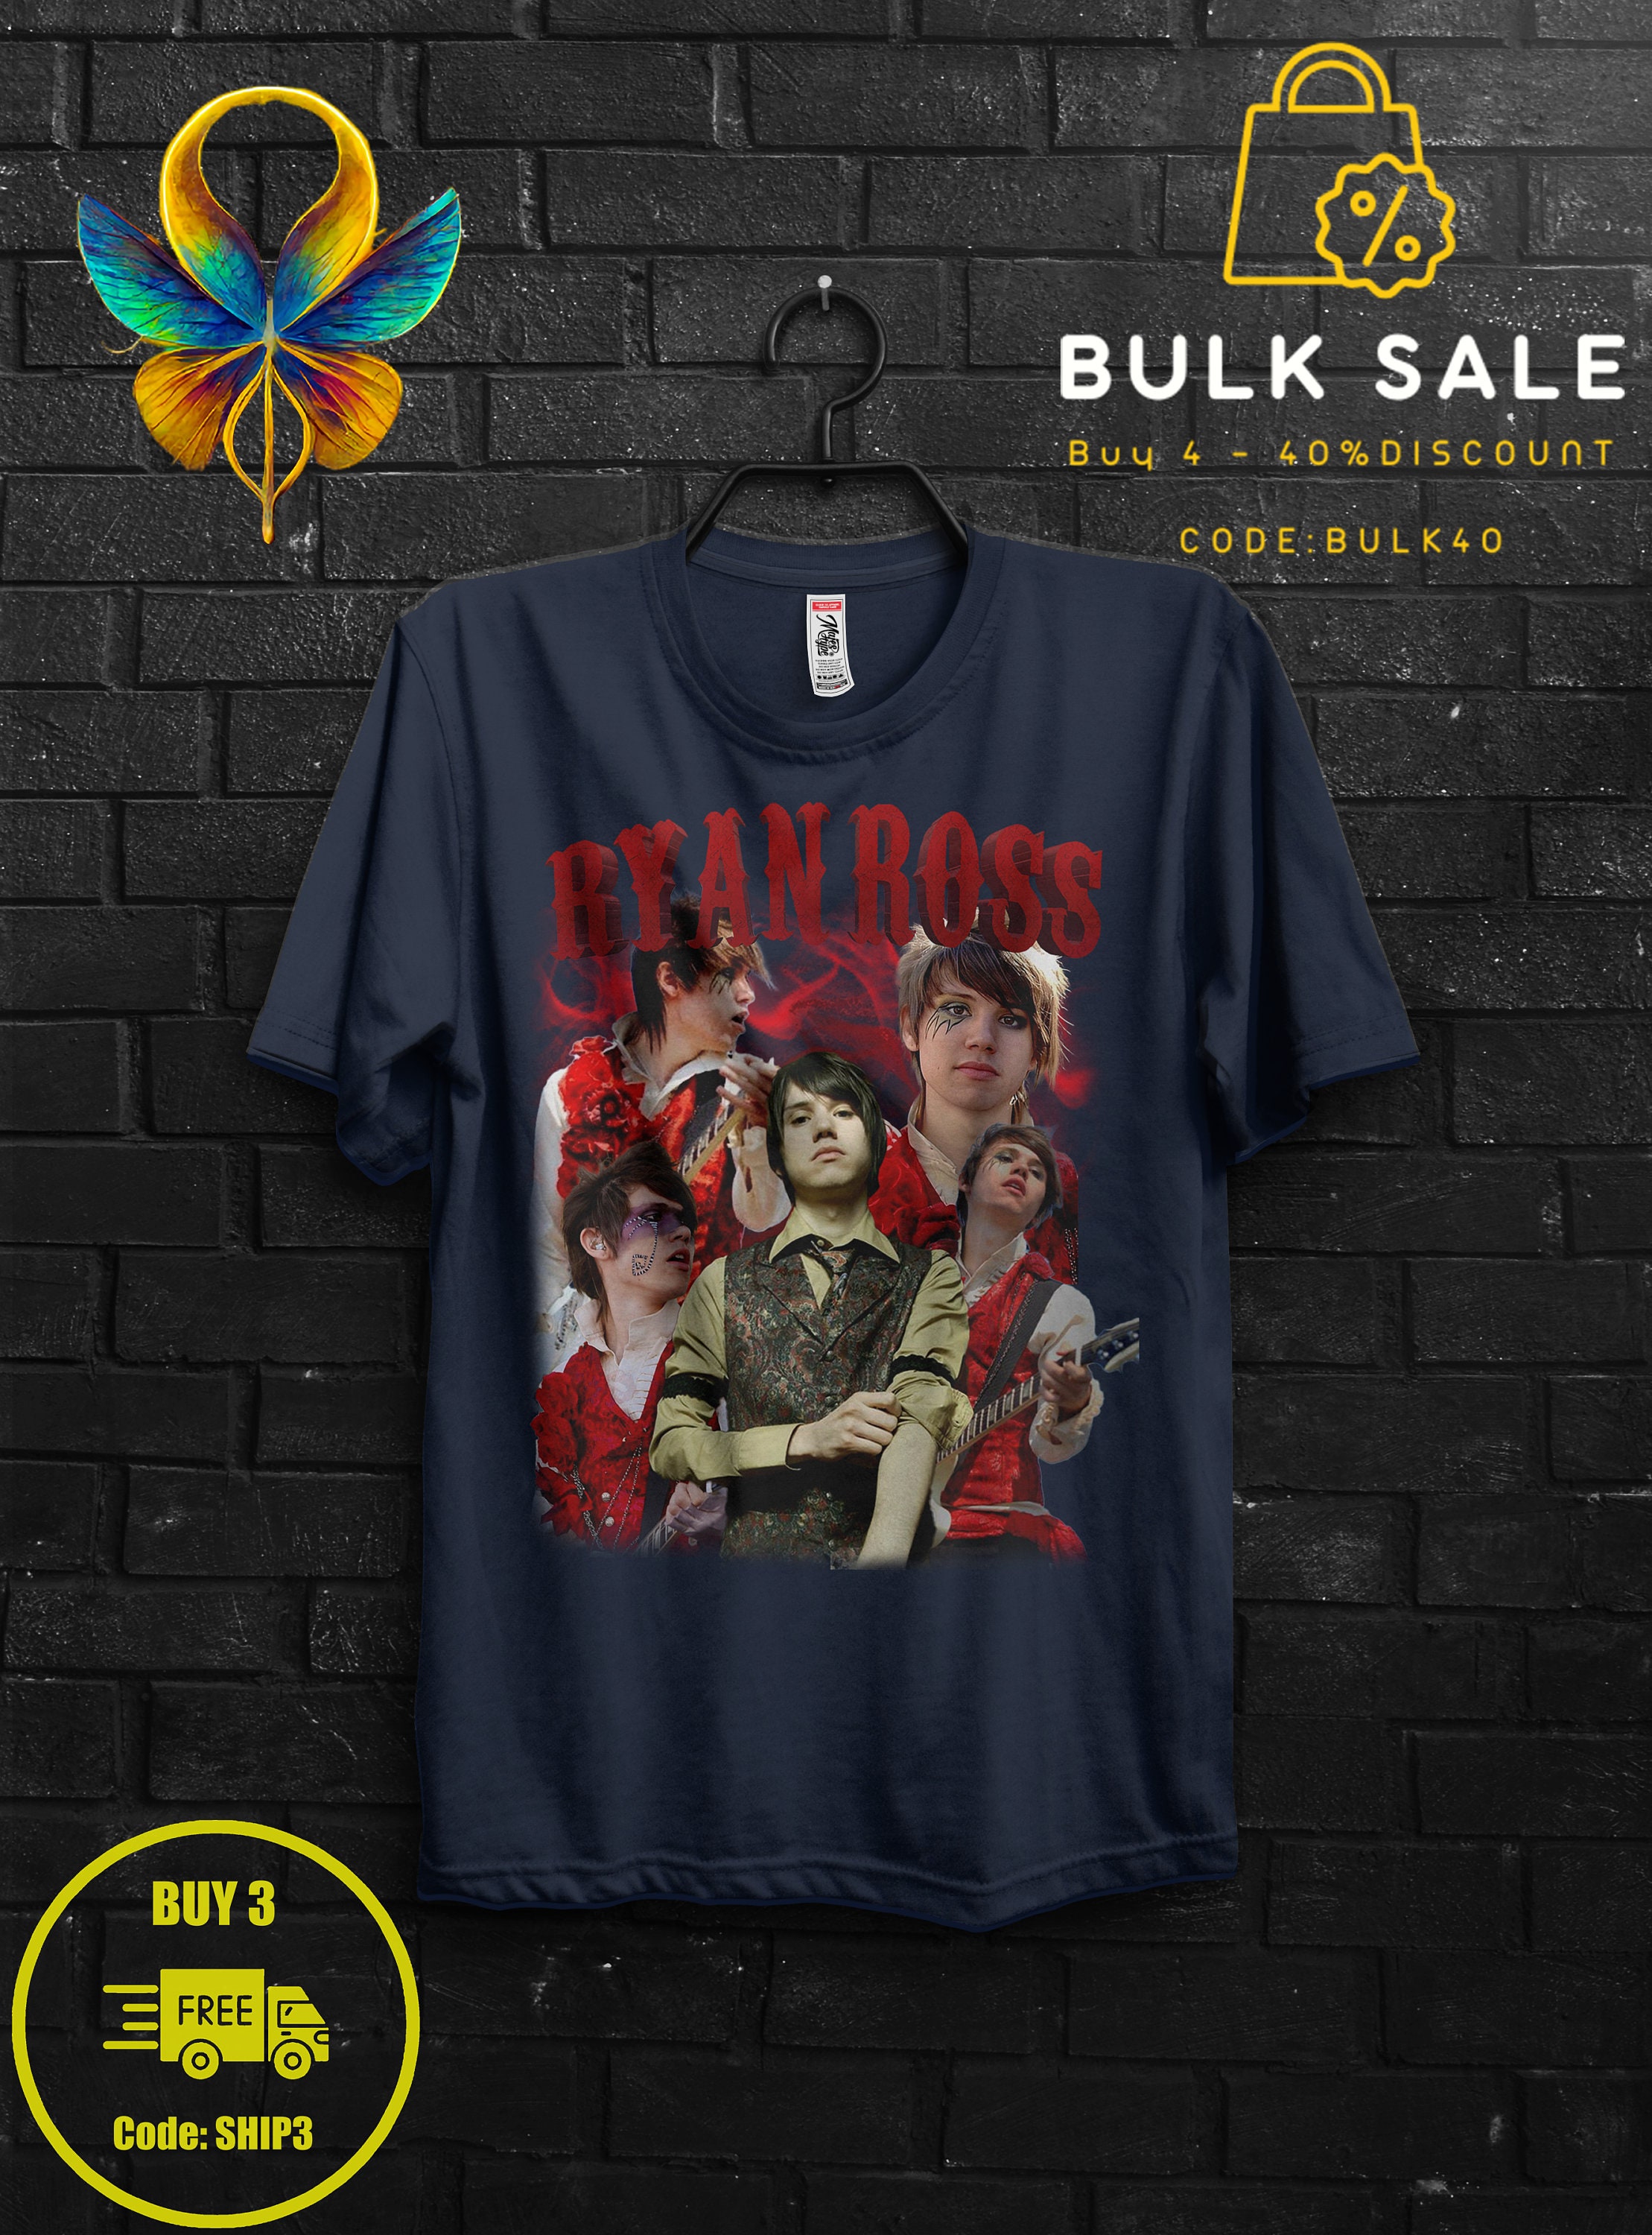 Ryan Ross Fan Gift TShirt,Widespread Panic,The Young Veins Emo Tee,Brendon Urie and John Walker Shirt,Afycso Appareal,Too Weird To Live Band 1546760454